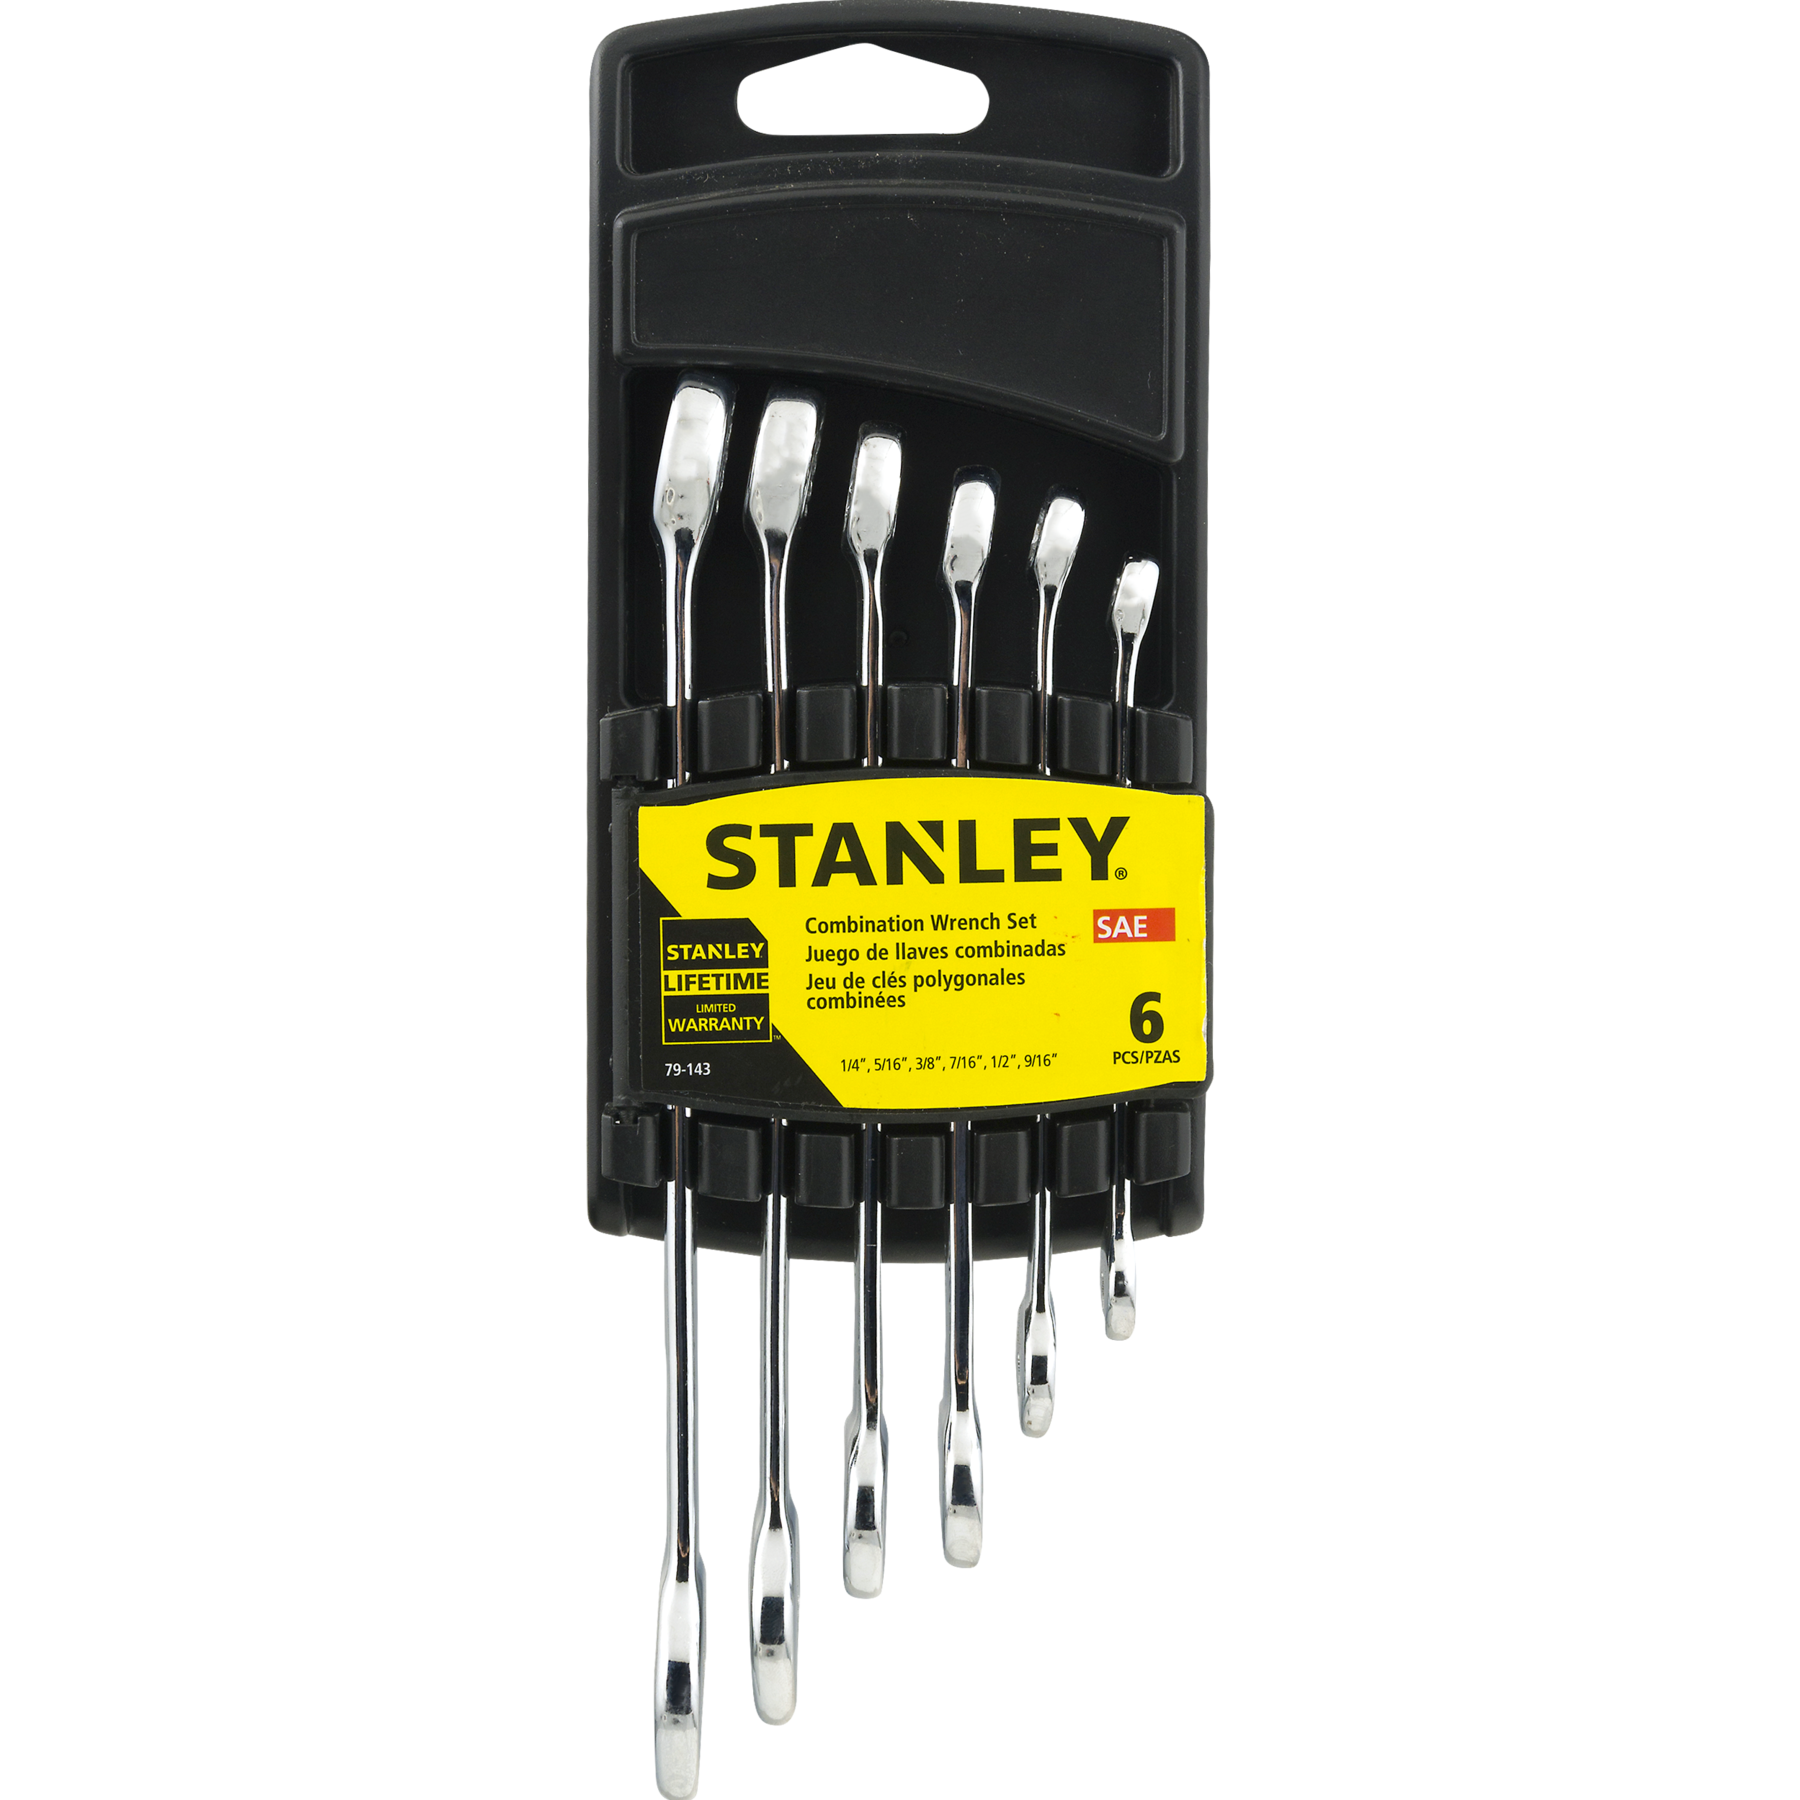 Stanley Combination Wrench Set - 6 PC, 6.0 PIECE(S) - image 4 of 5